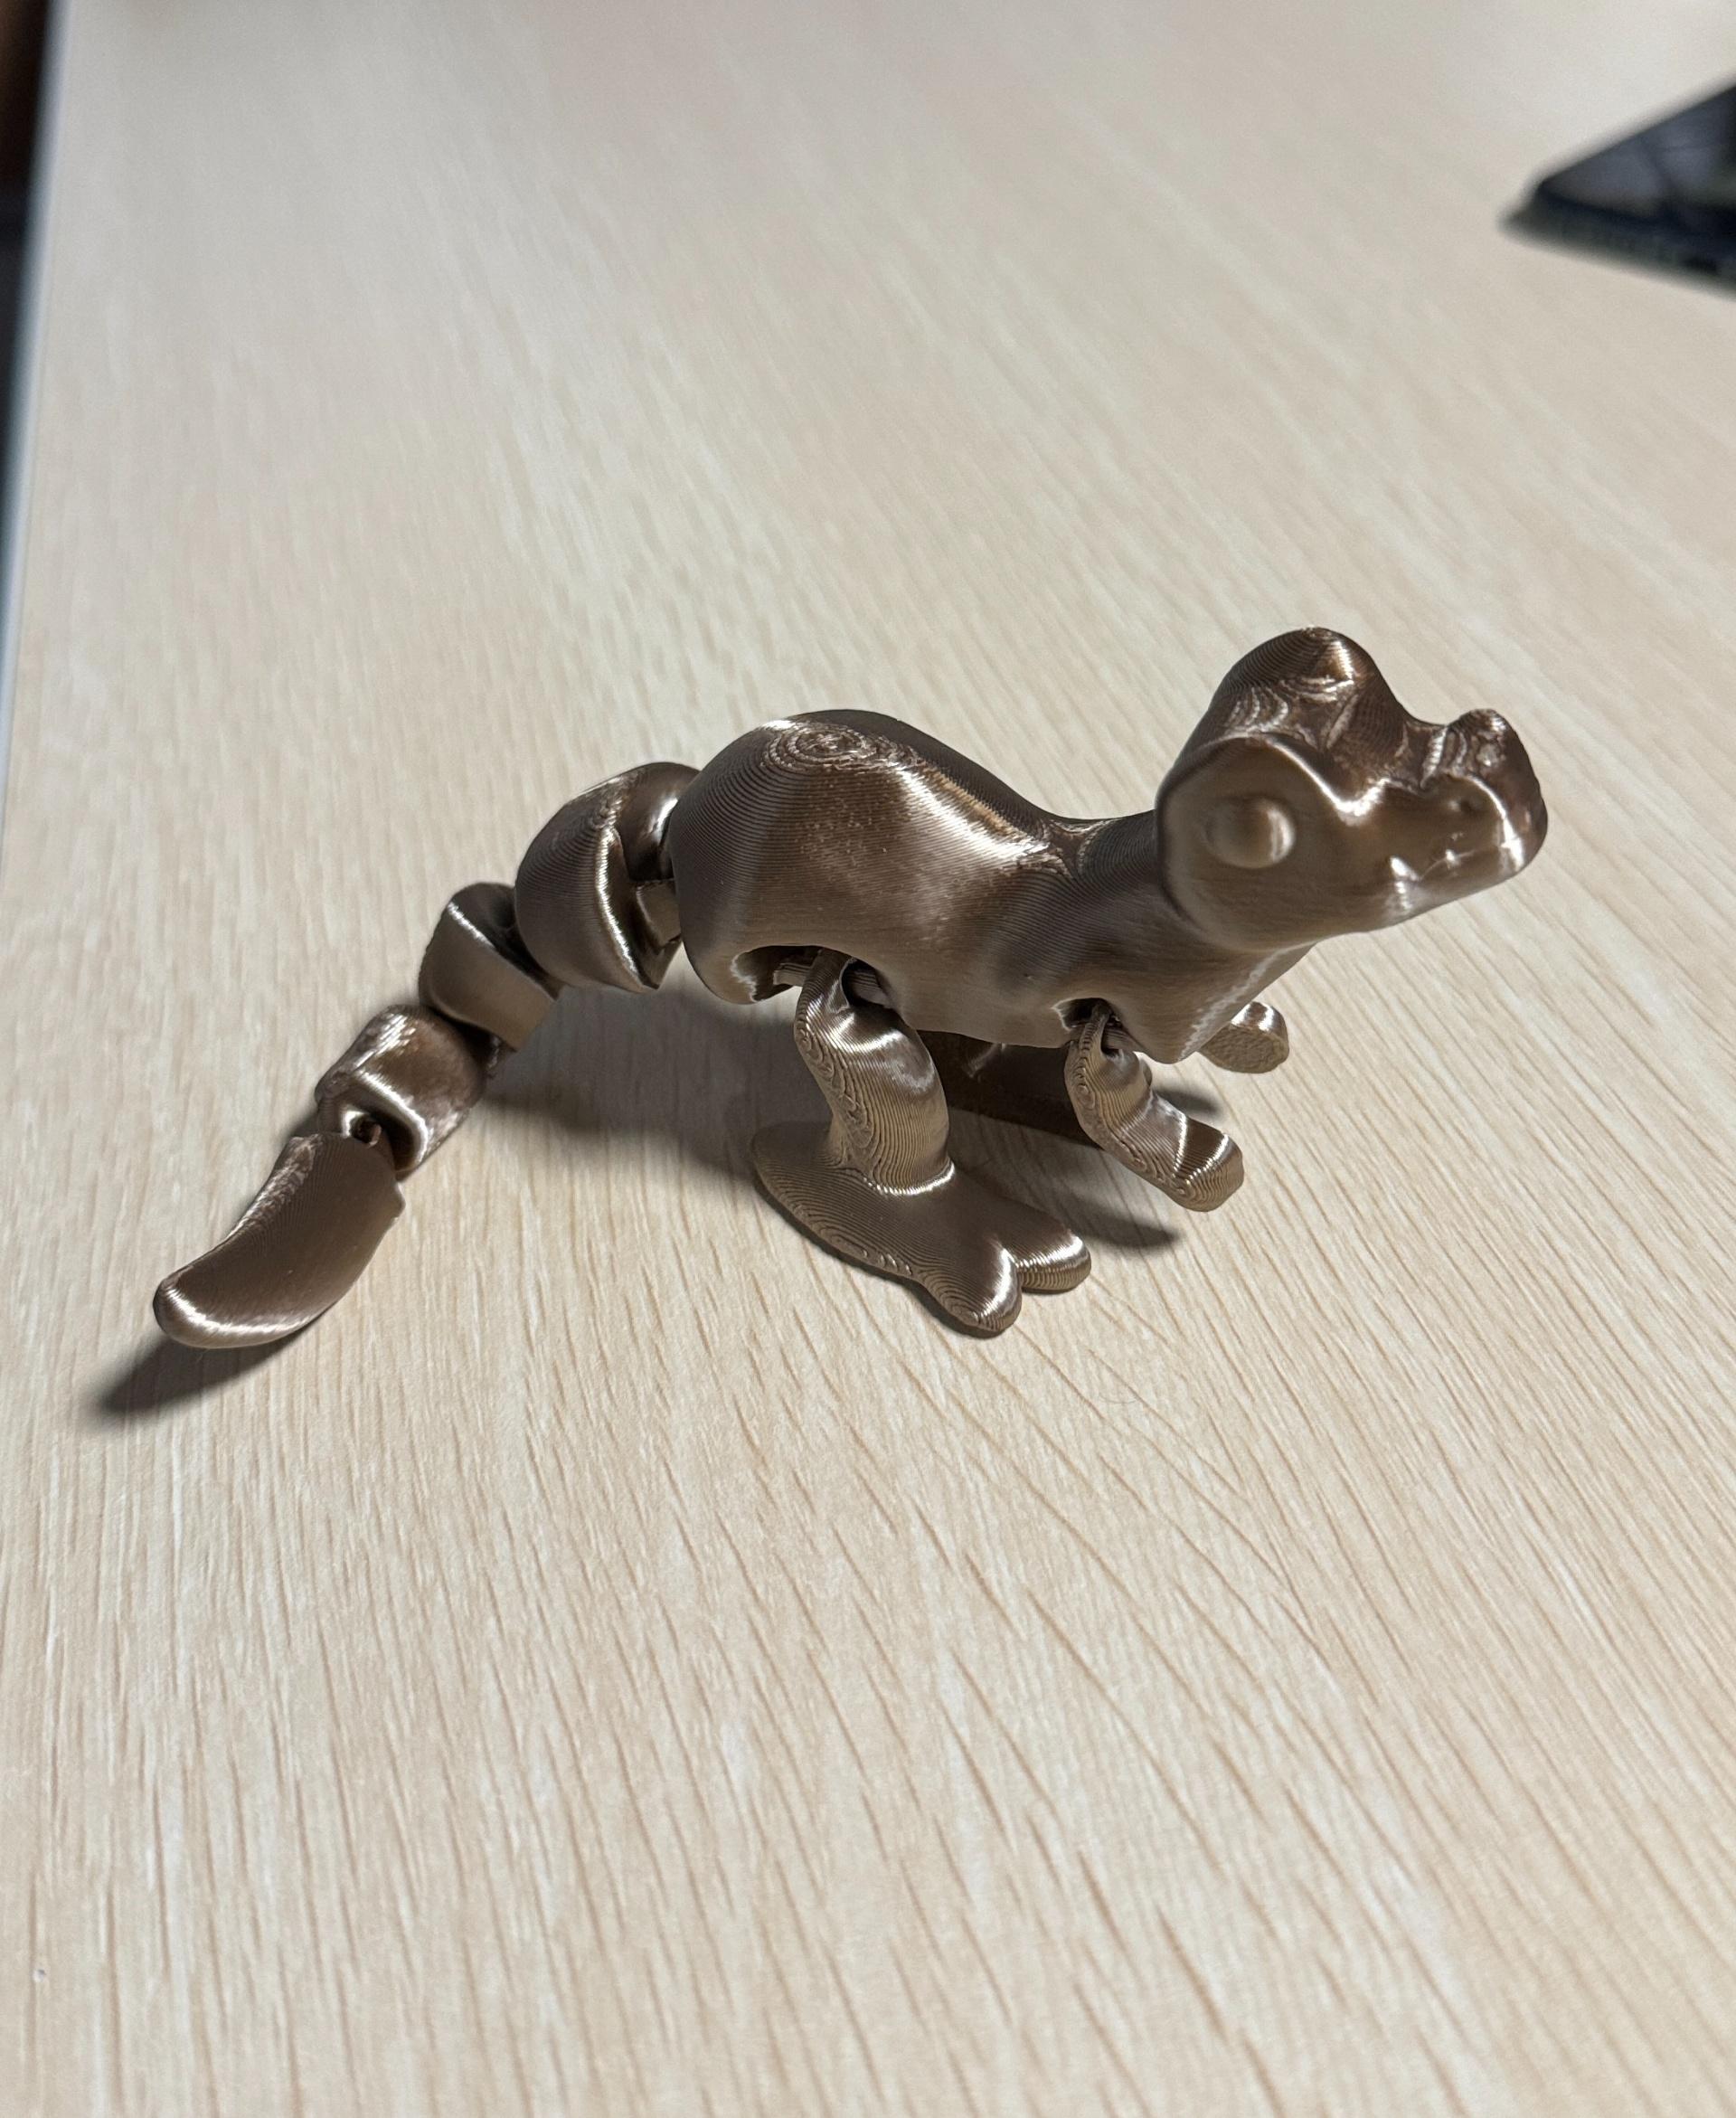 Cute Flexi Raptor - Printed on a Bambu P1S using TTYT3D `Silk Shiny Fast Color Gradient Change` PLA
- no supports - 3d model